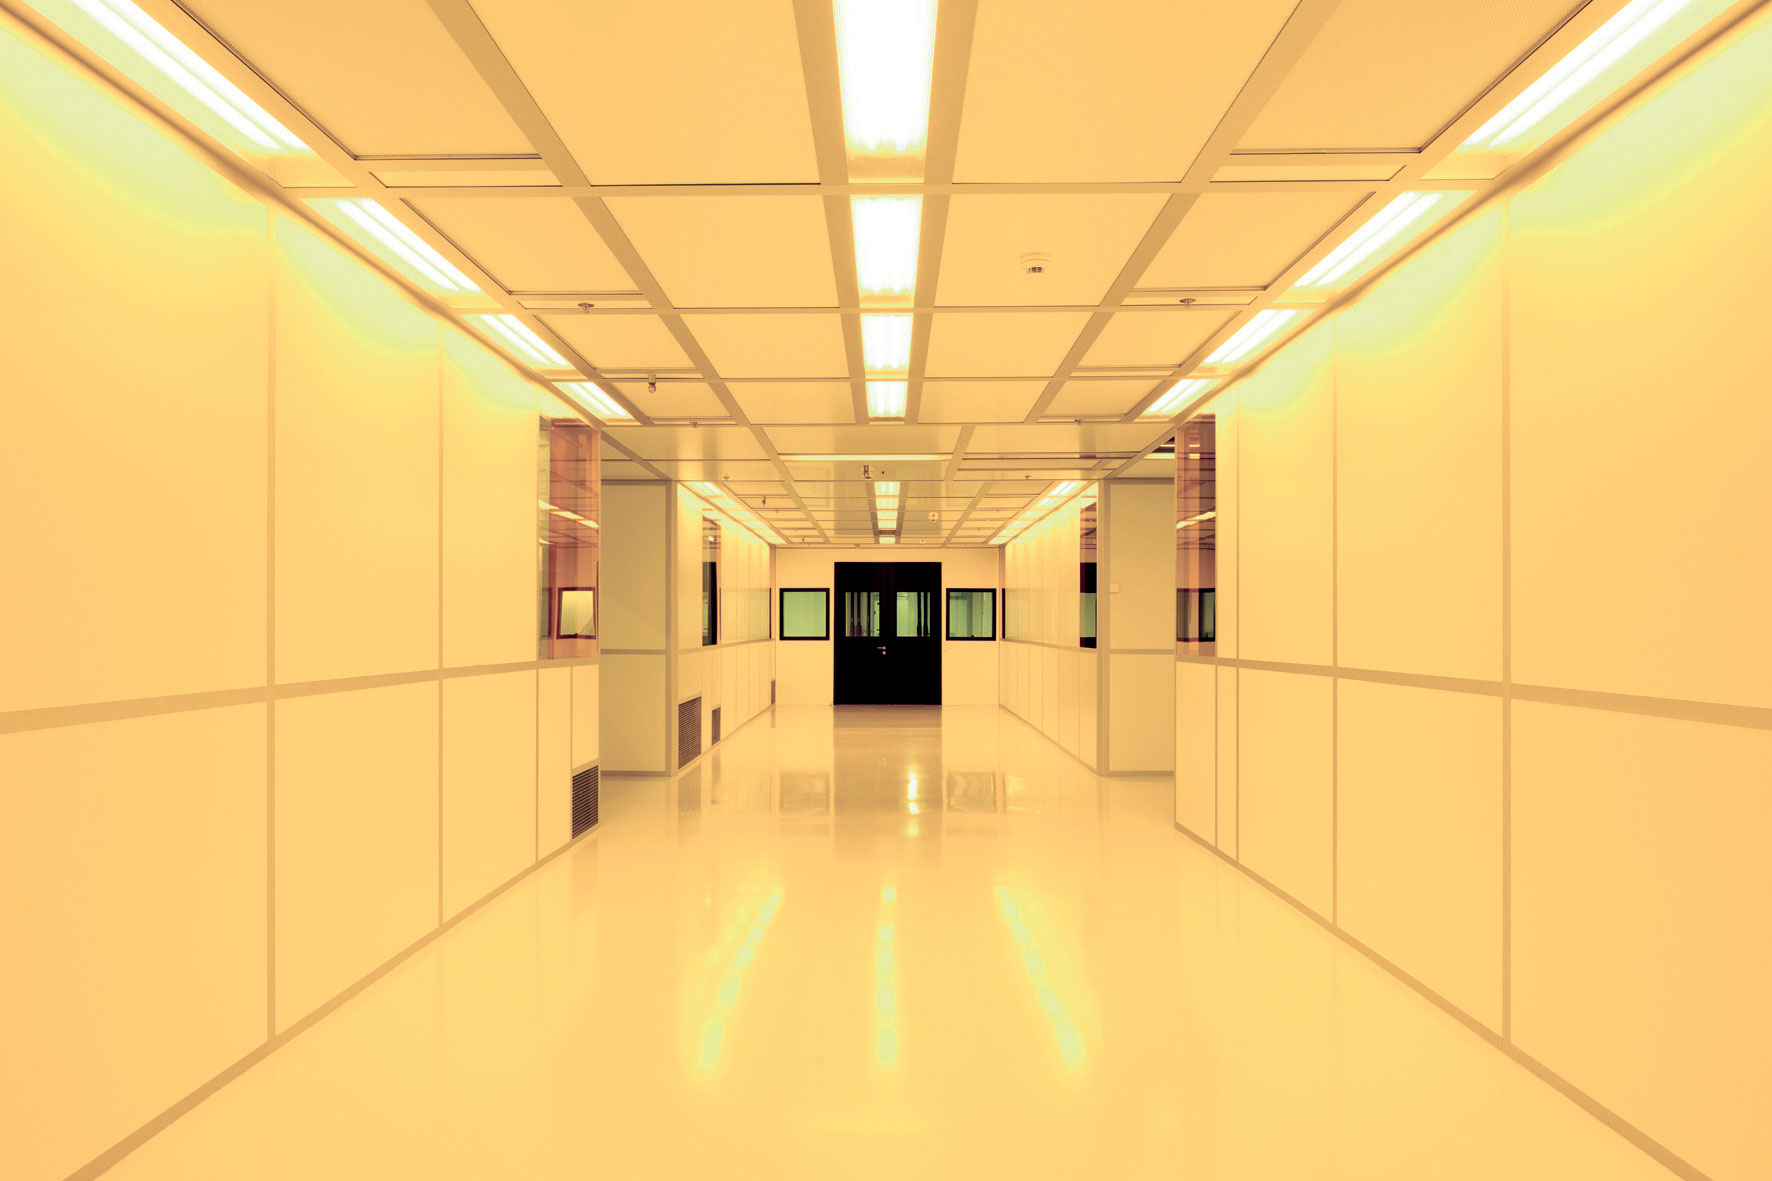 Cleanroom for semiconductor production, ISO 6